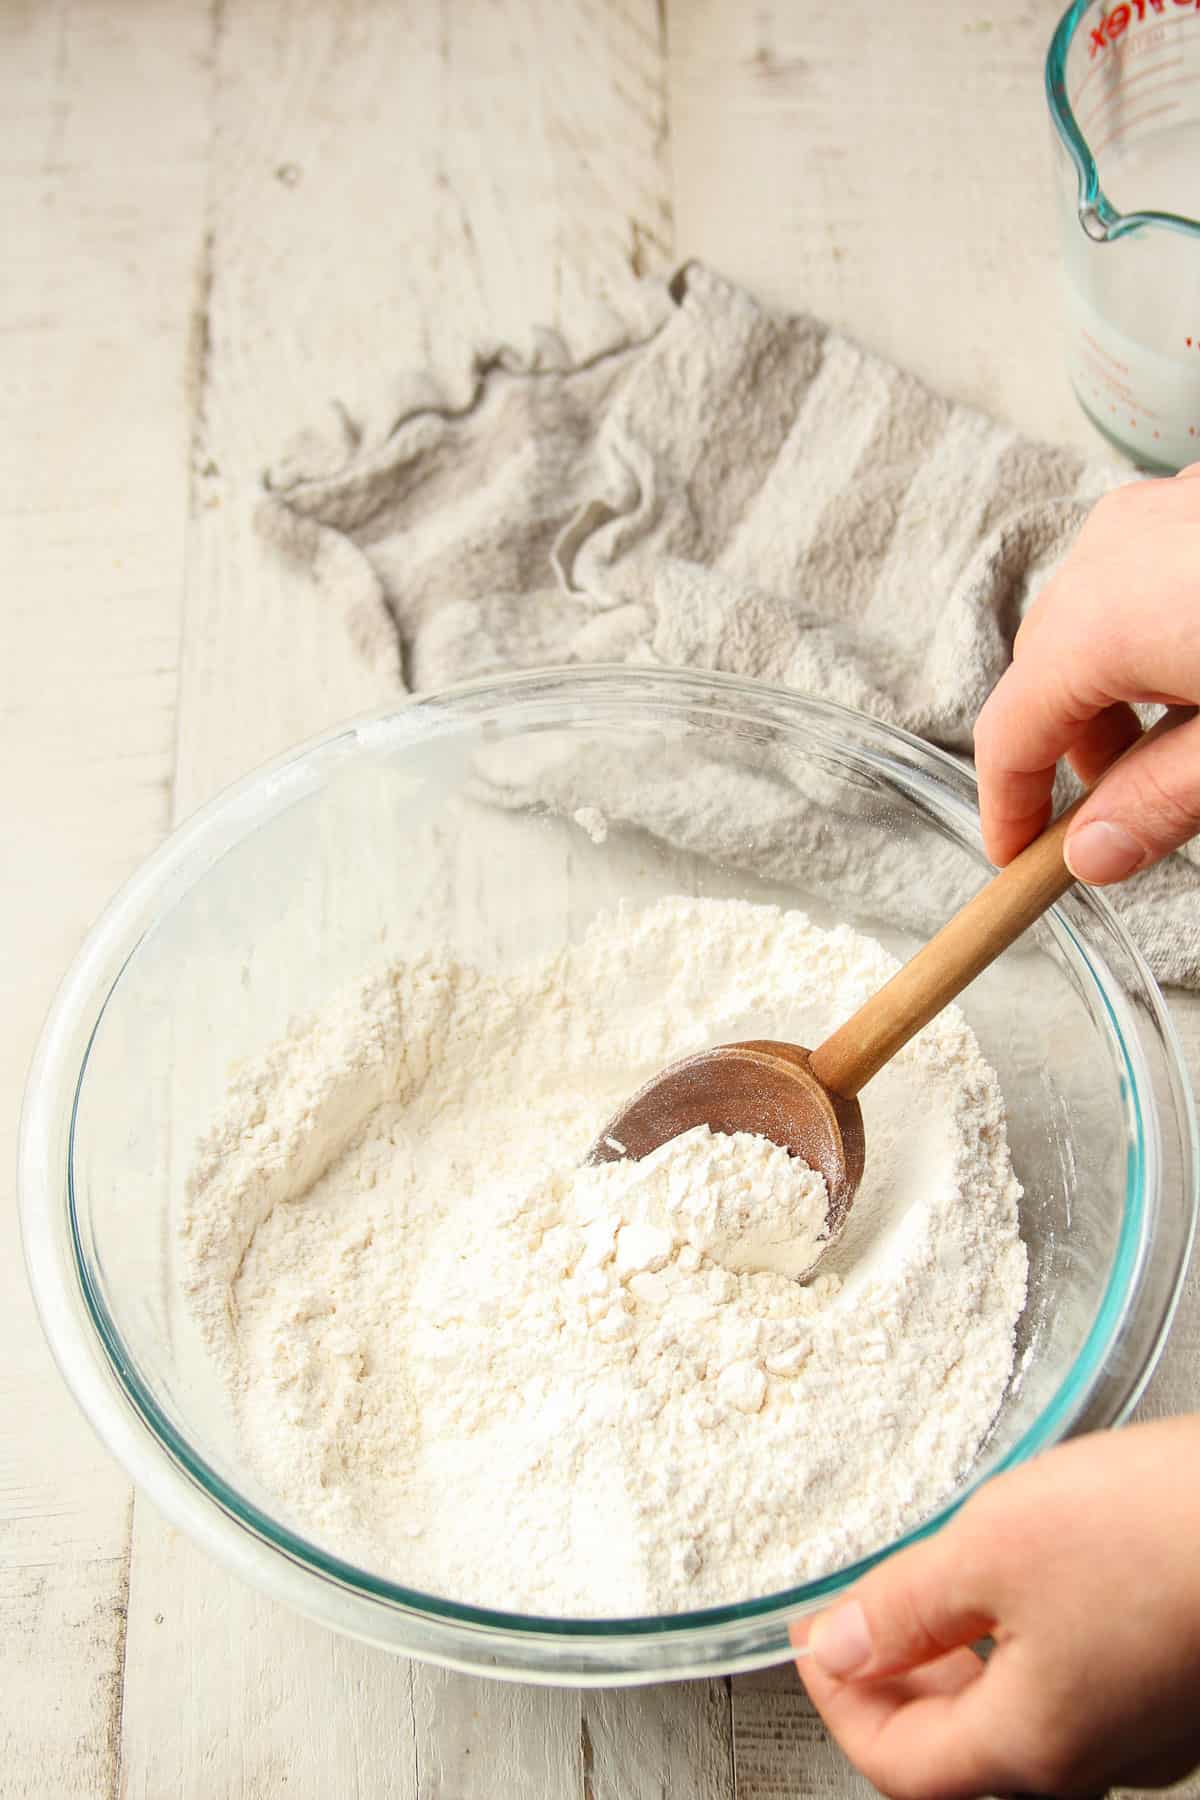 Hand stirring dry ingredients for biscuit dough together in a glass bowl.